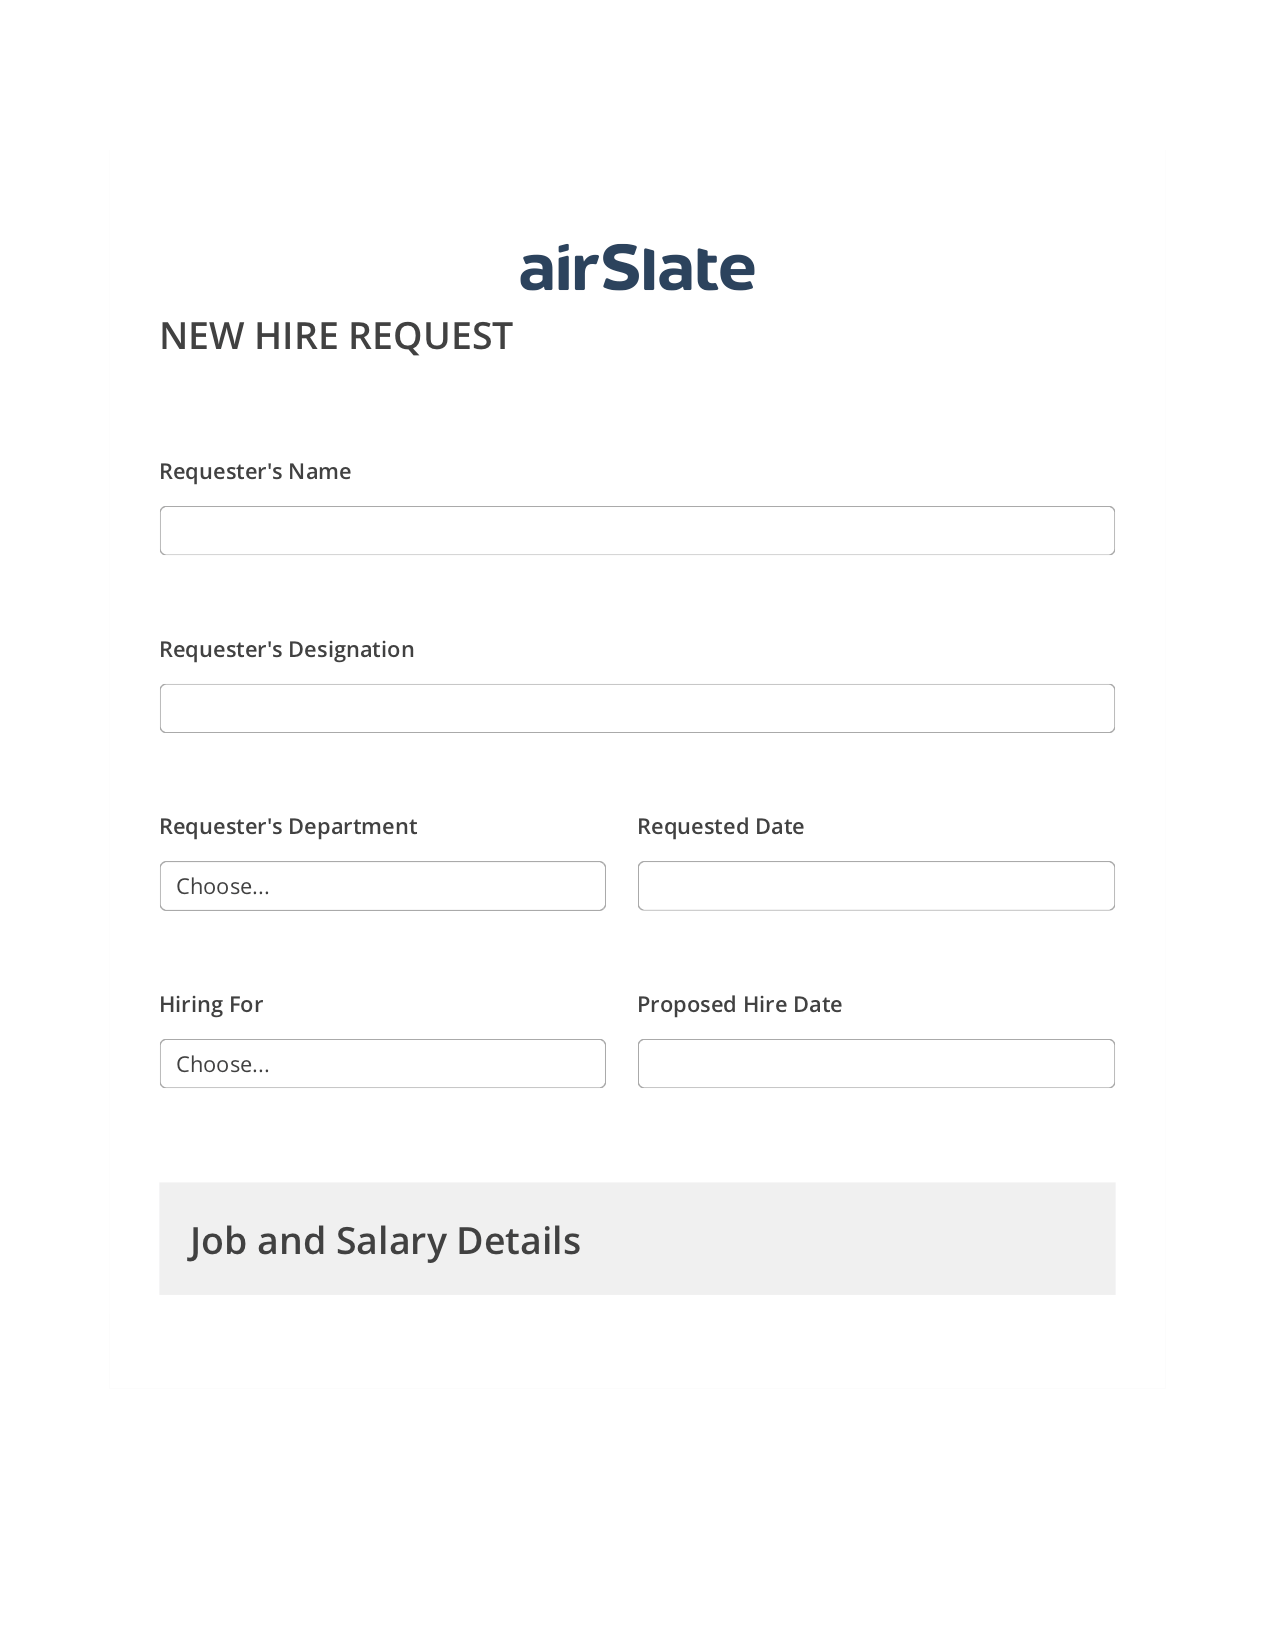 Multirole Hiring Request Workflow Pre-fill Document Bot, Text Message Notification Bot, Archive to SharePoint Folder Bot